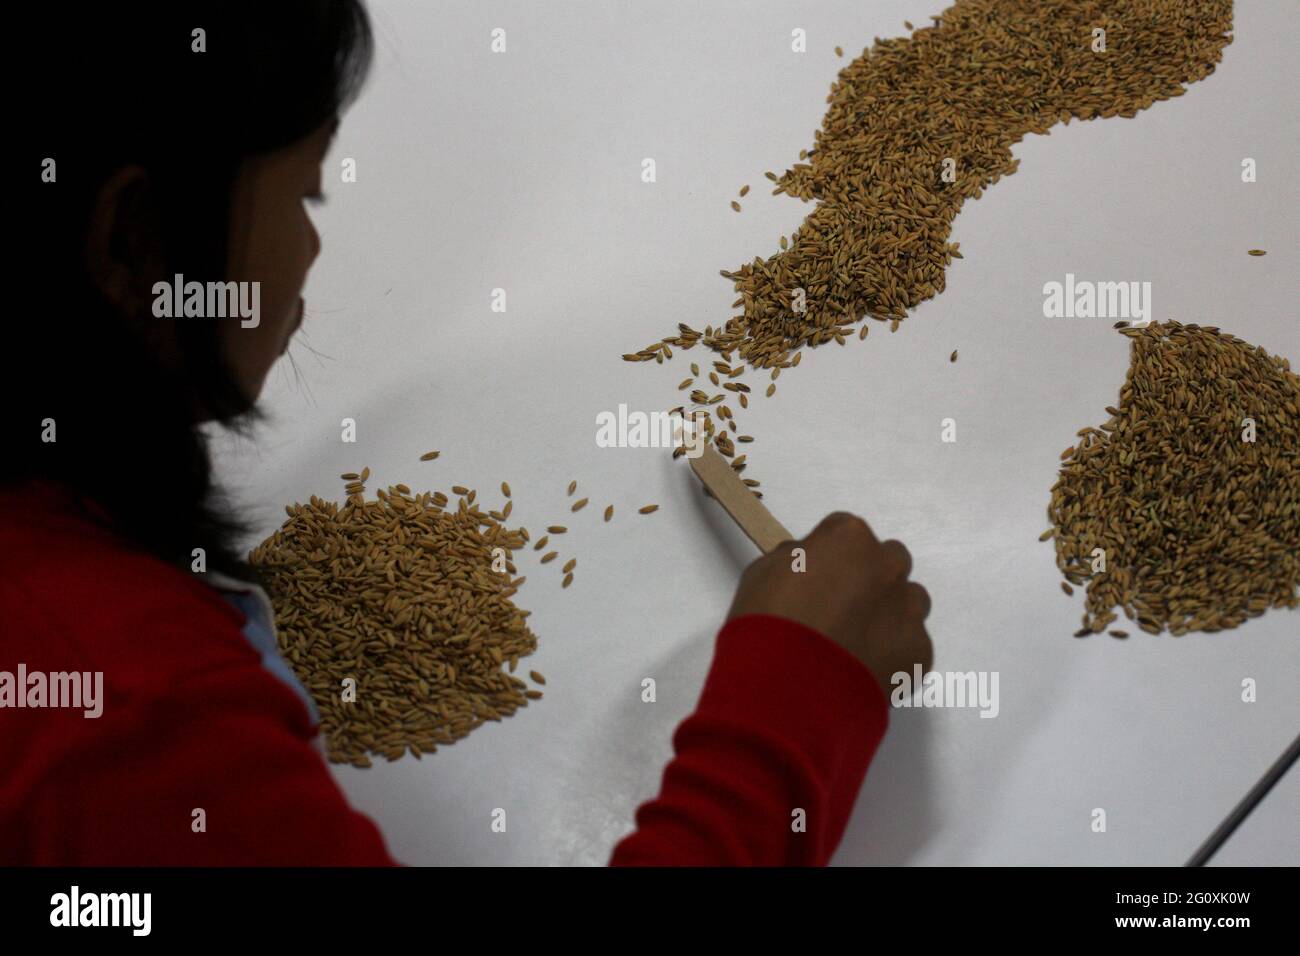 The International Rice Research Institute (IRRI) at Los Baños, Philippines. Stock Photo